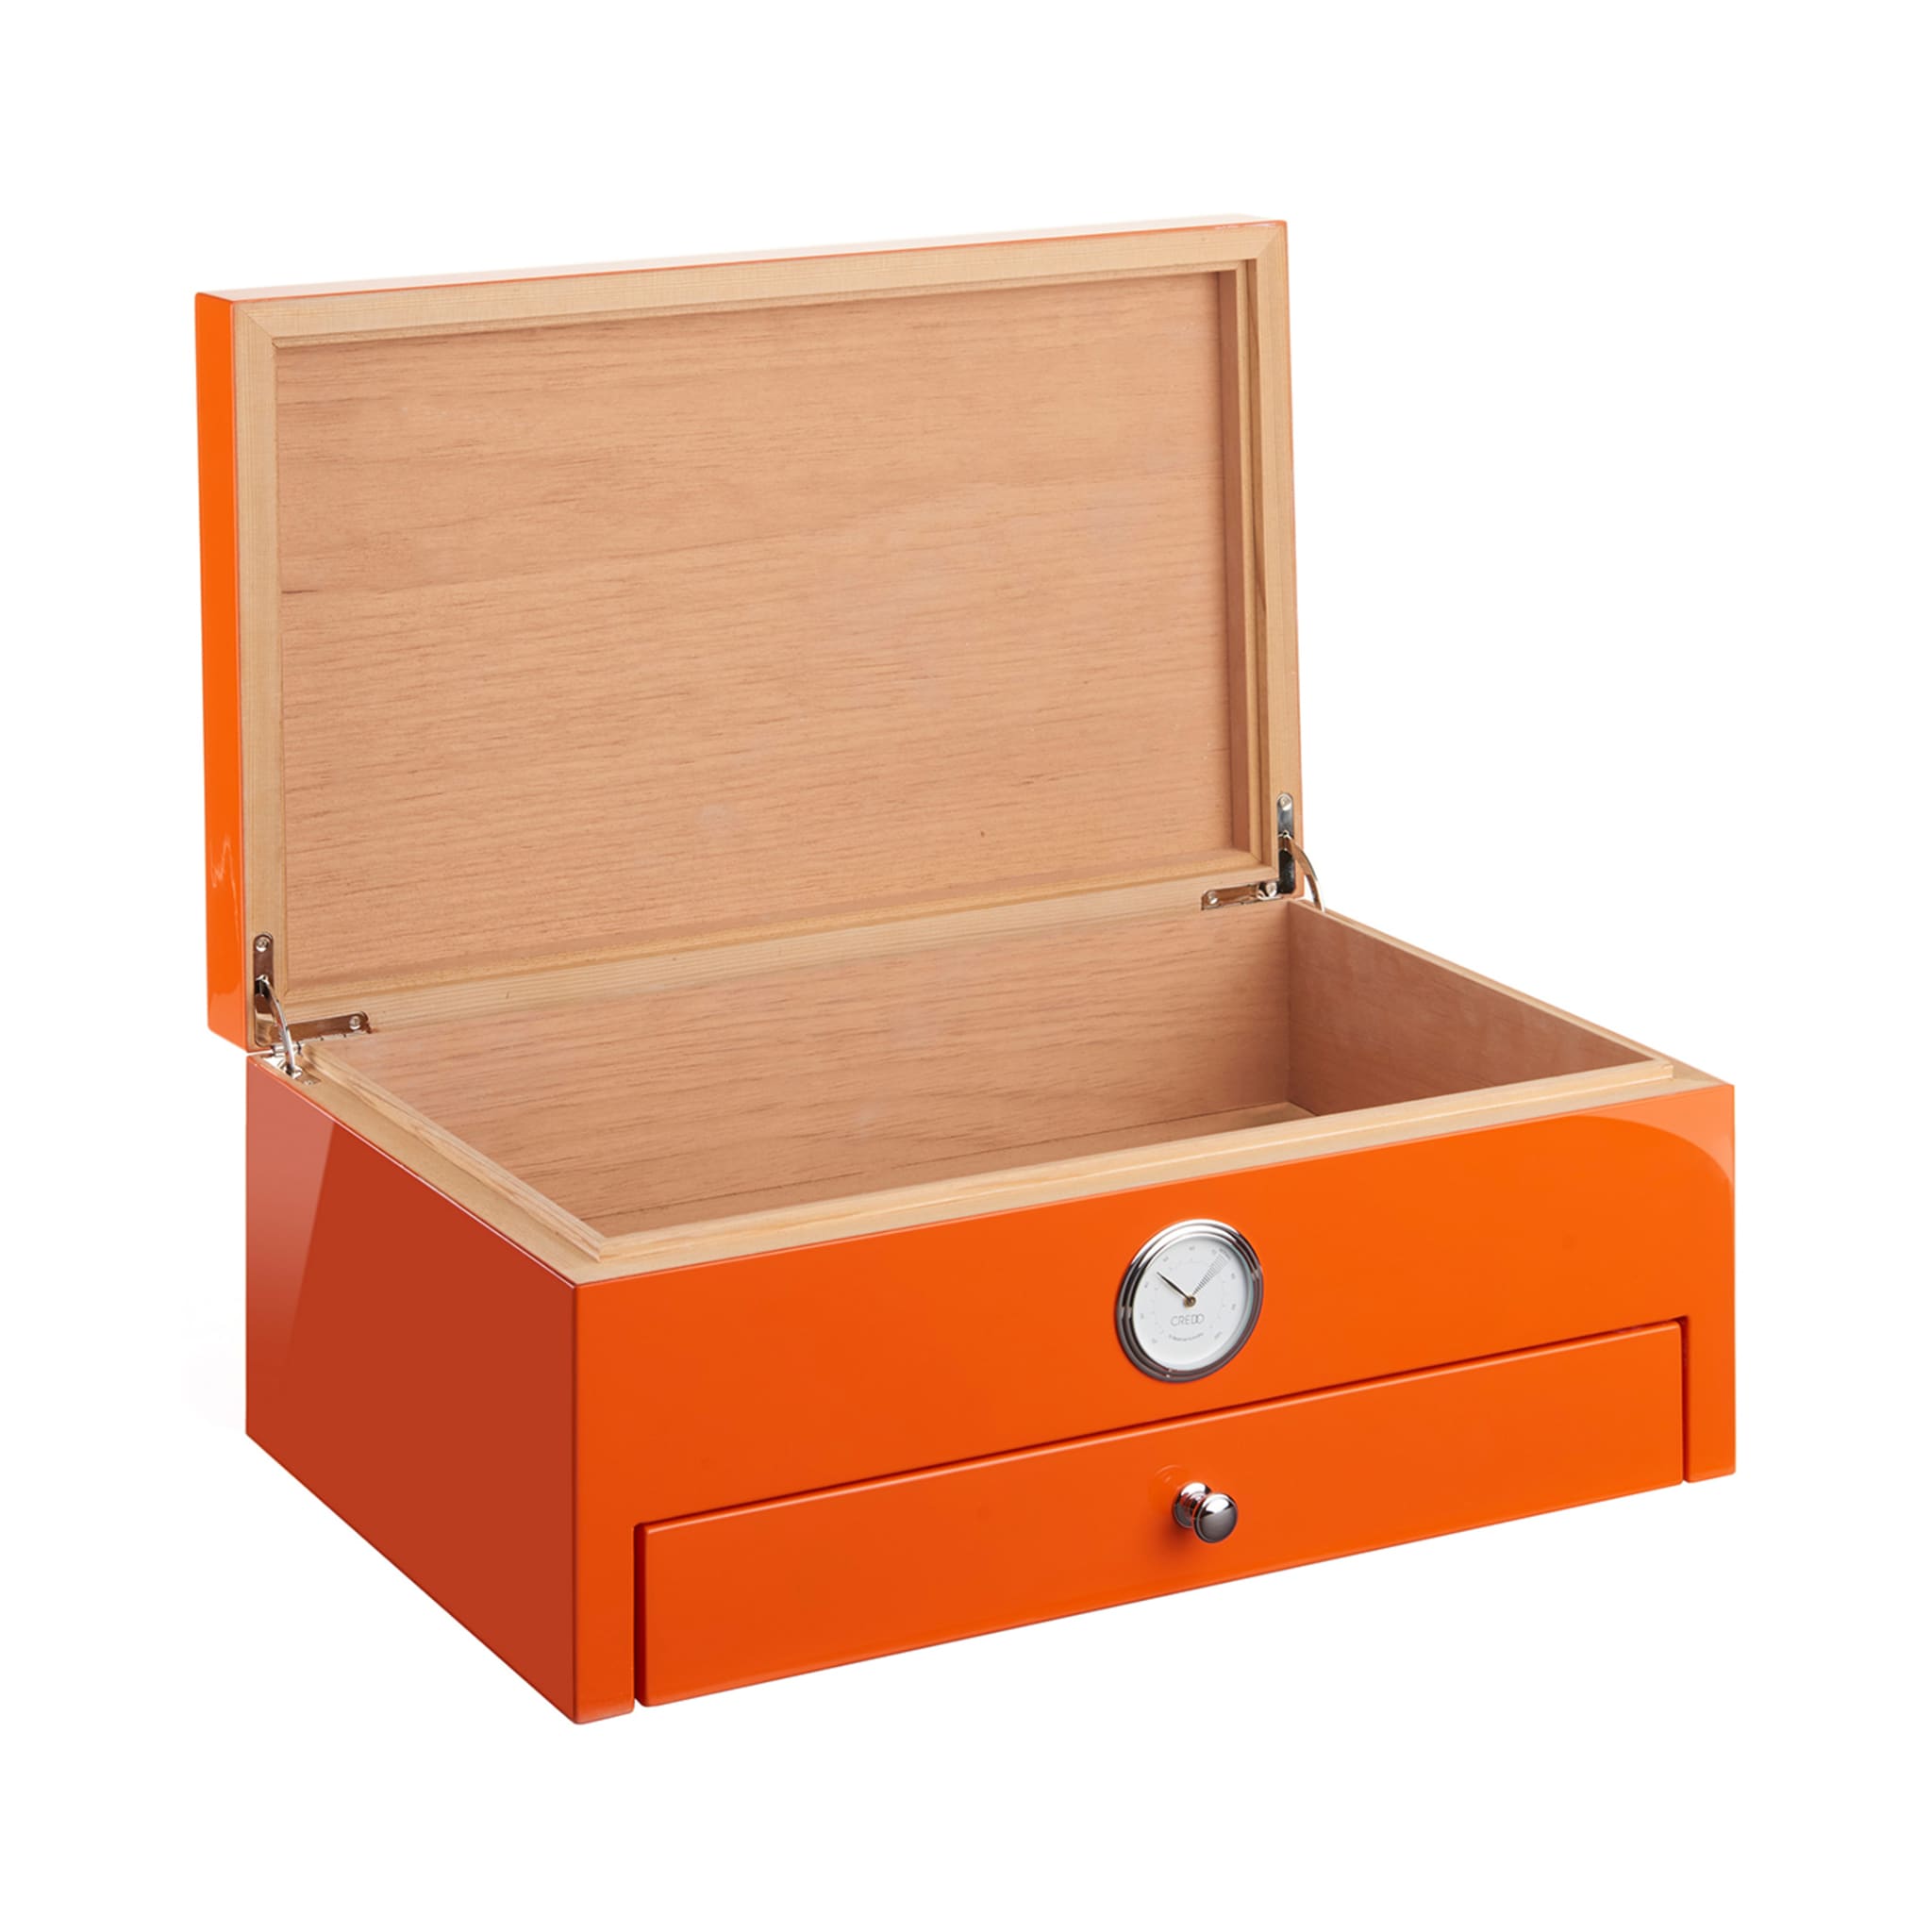 Carribean-inspired Orange Humidor (Special Club Edition)  - Alternative view 2